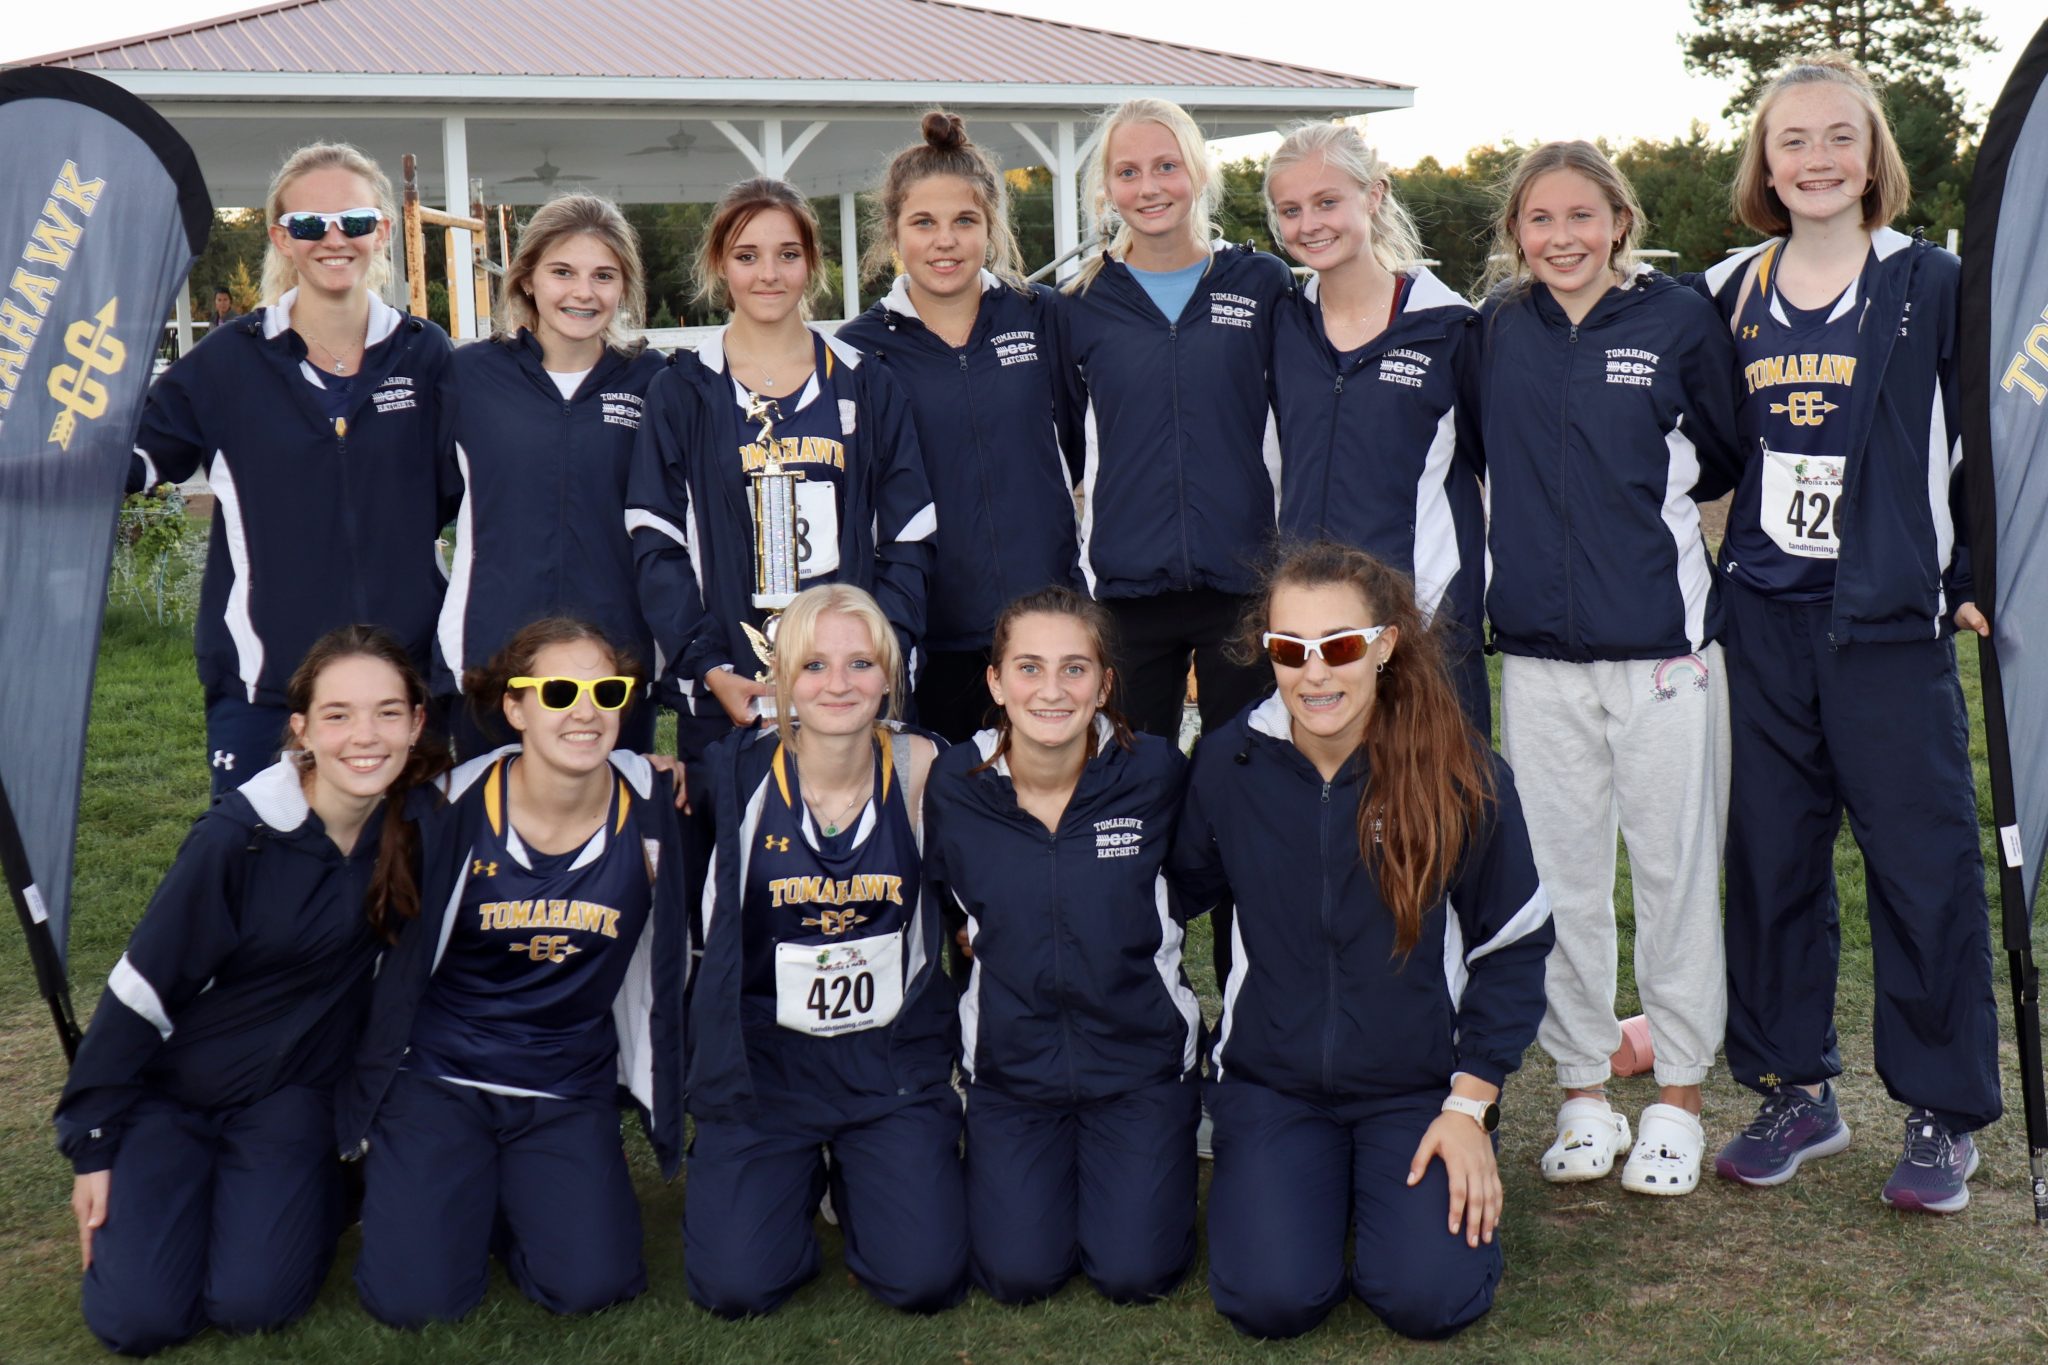 Cross country: Lady Hatchets, Rachael Reilly each take first place at Blue Jay Invite